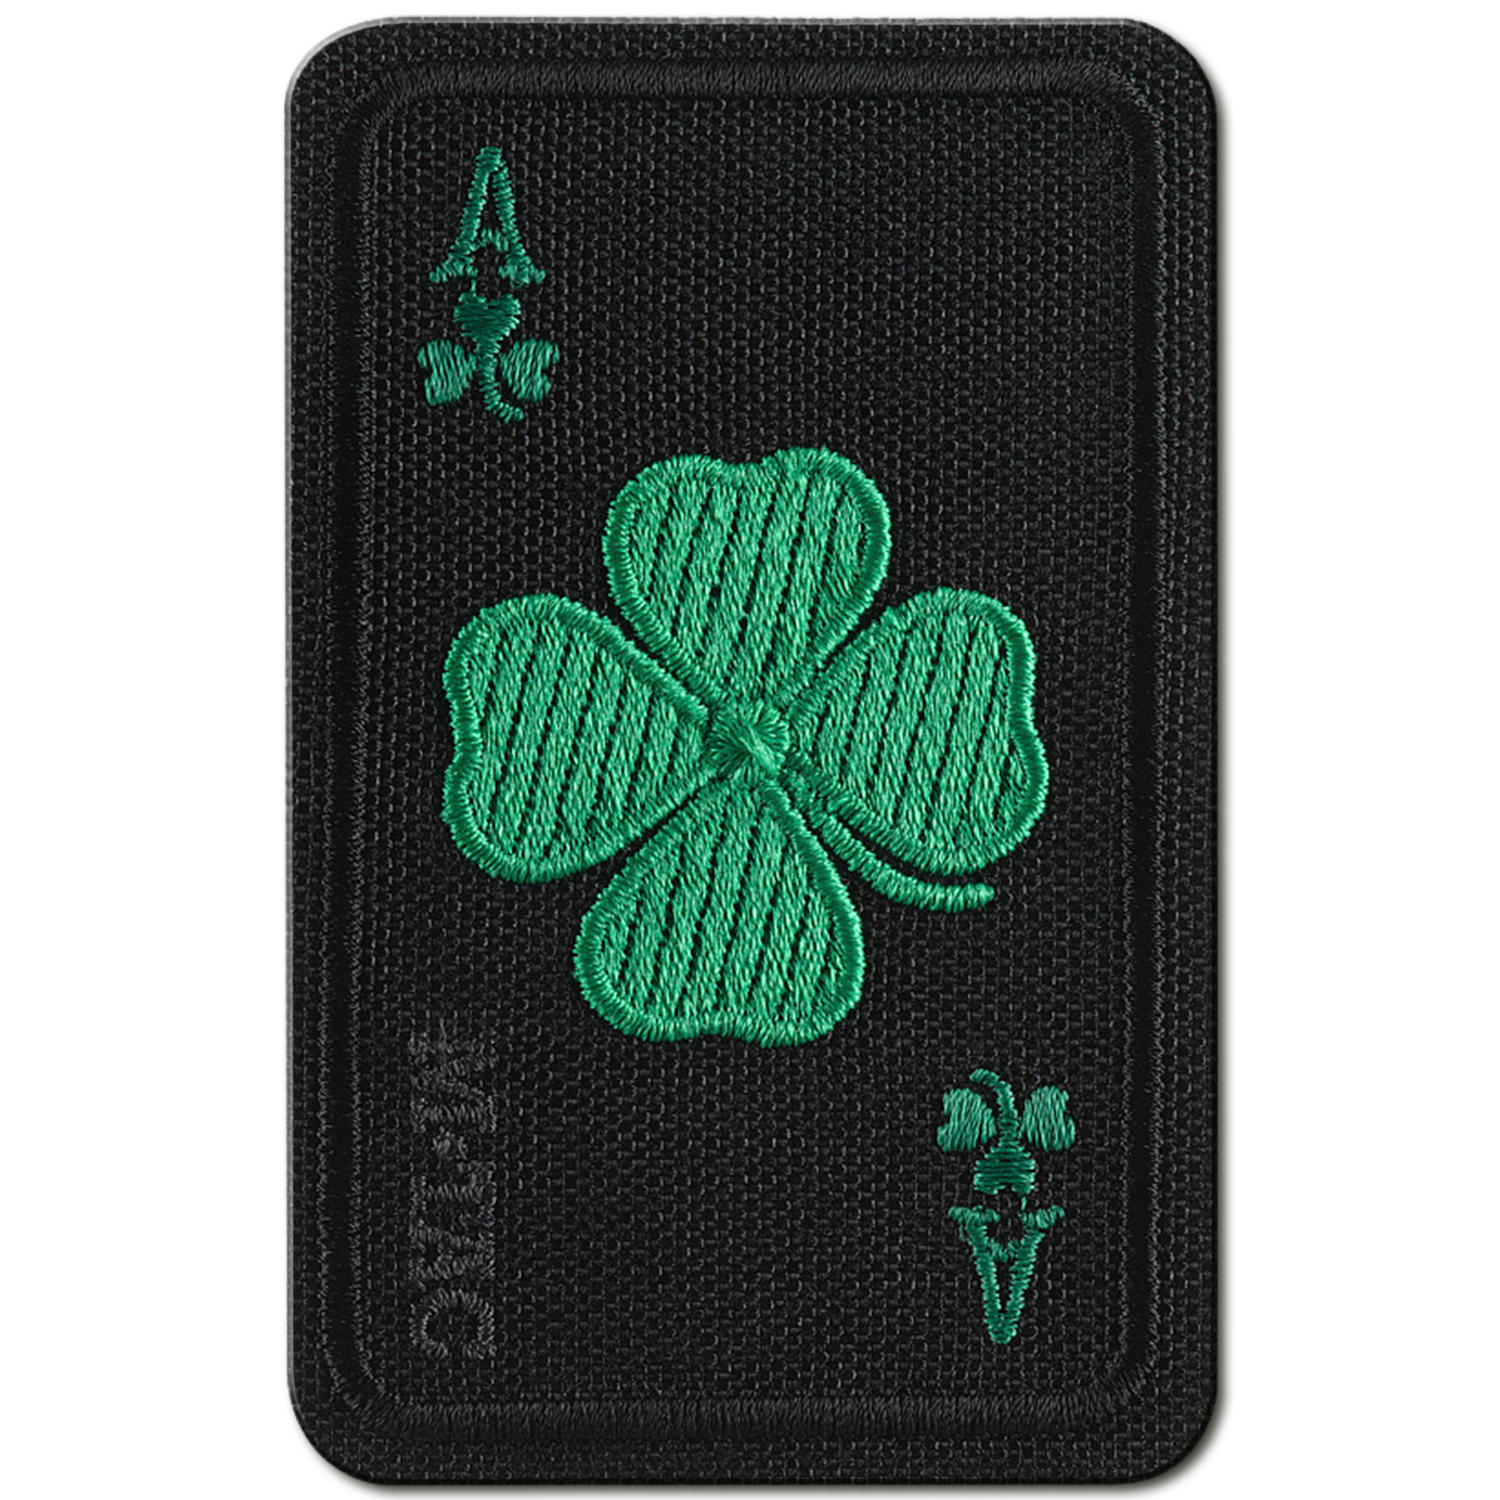 M-Tac Morale Patch Clover - Tactical Embroidered Military Badge with Hook  Fastener Backing